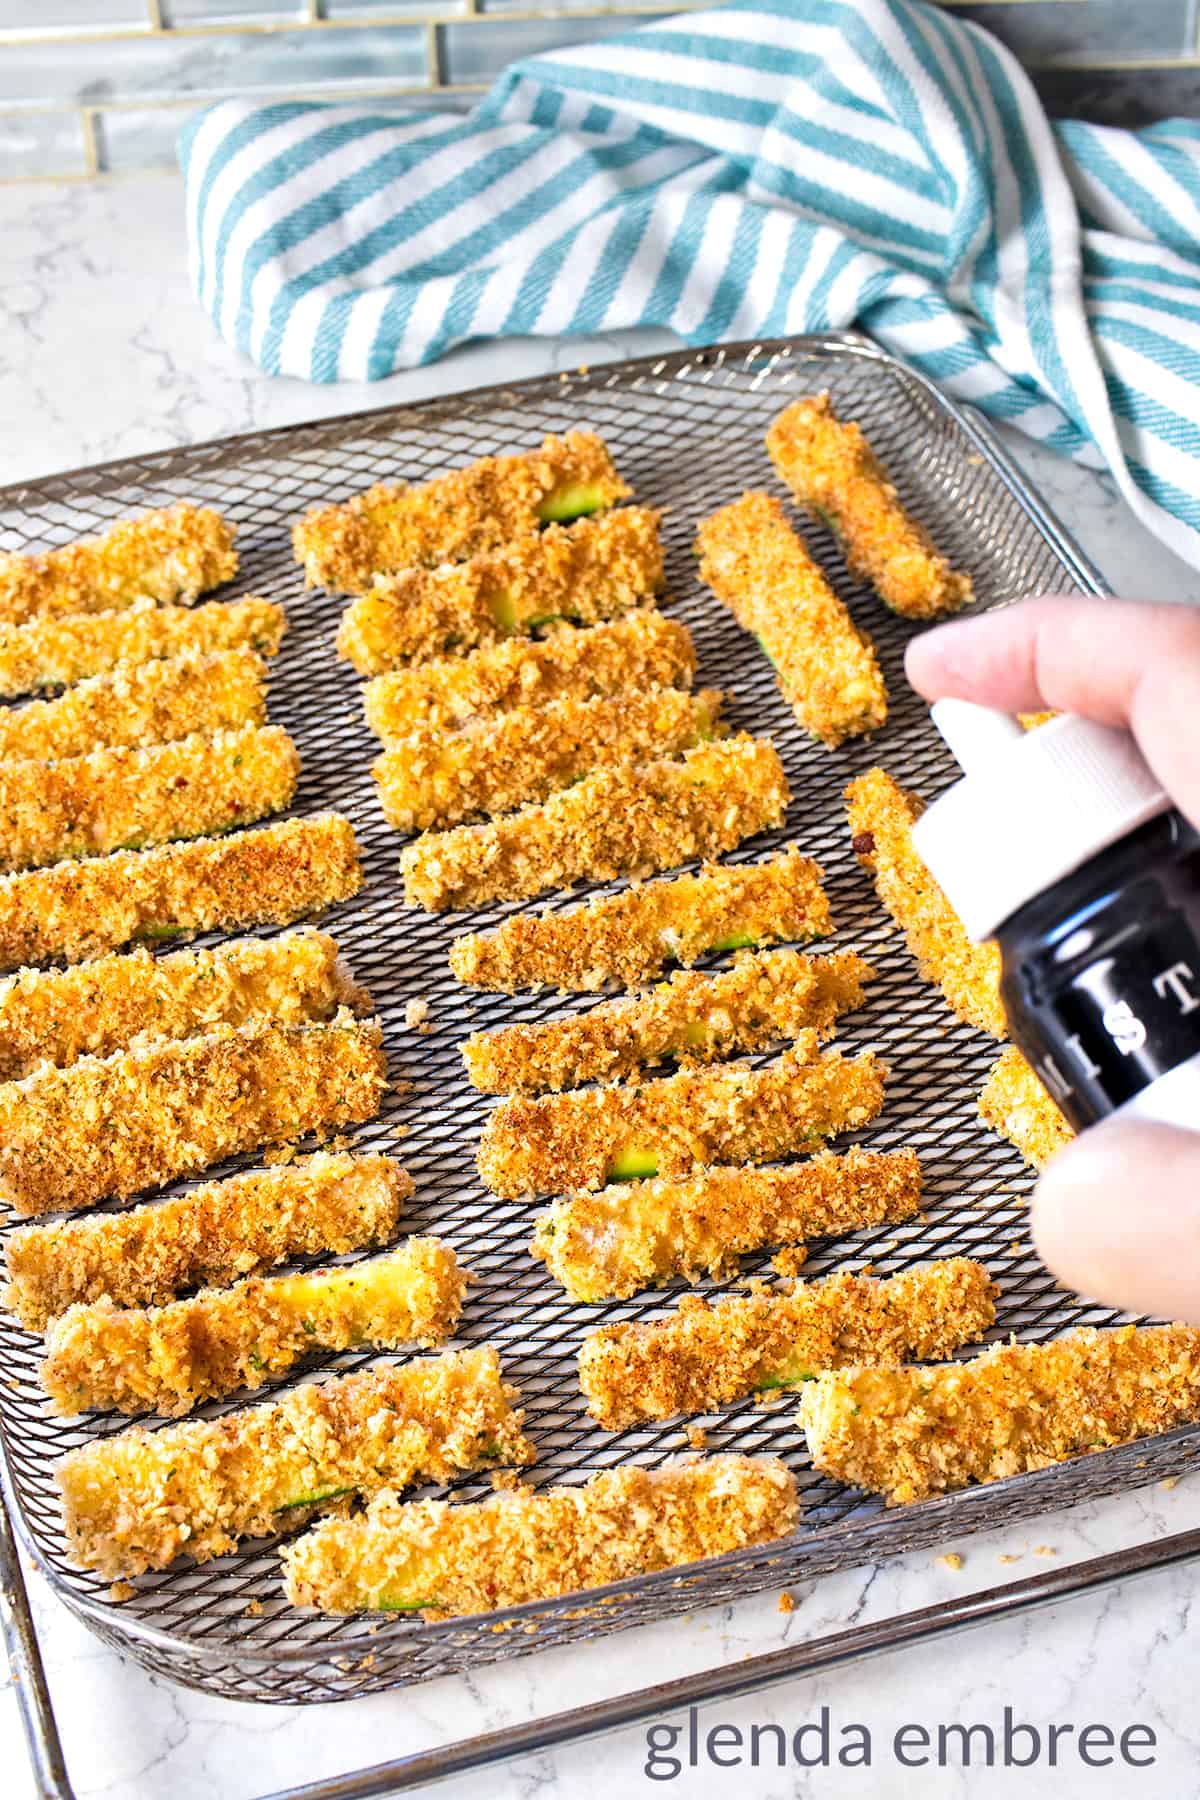 misting prepped zucchini fries with oil before air frying